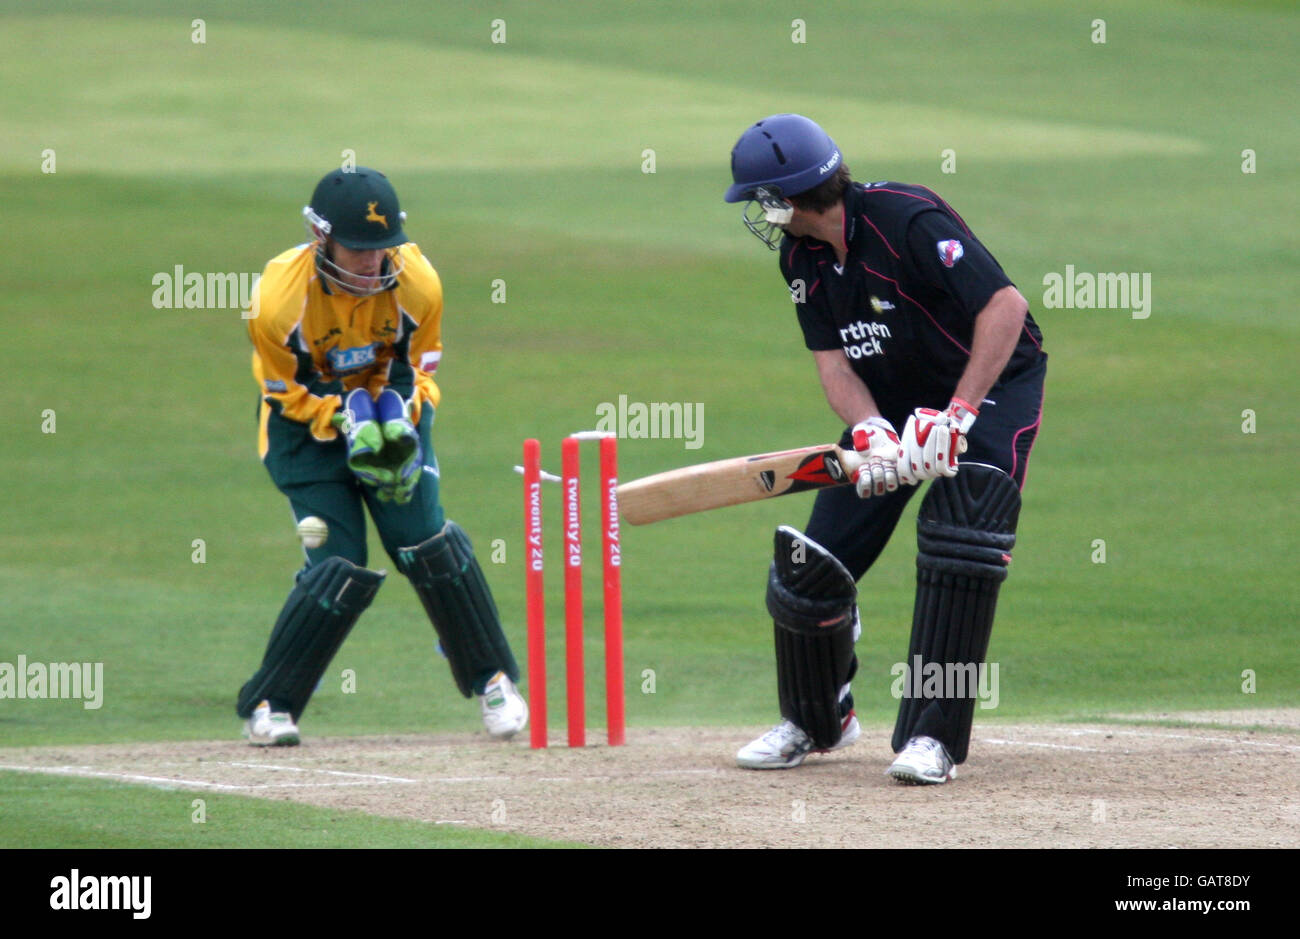 Durham Dynamos' Liam Plunkett looks behind him as the bails fall, but after initially starting to walk off believing himself to be out he stayed in when the umpire did not give him out Stock Photo